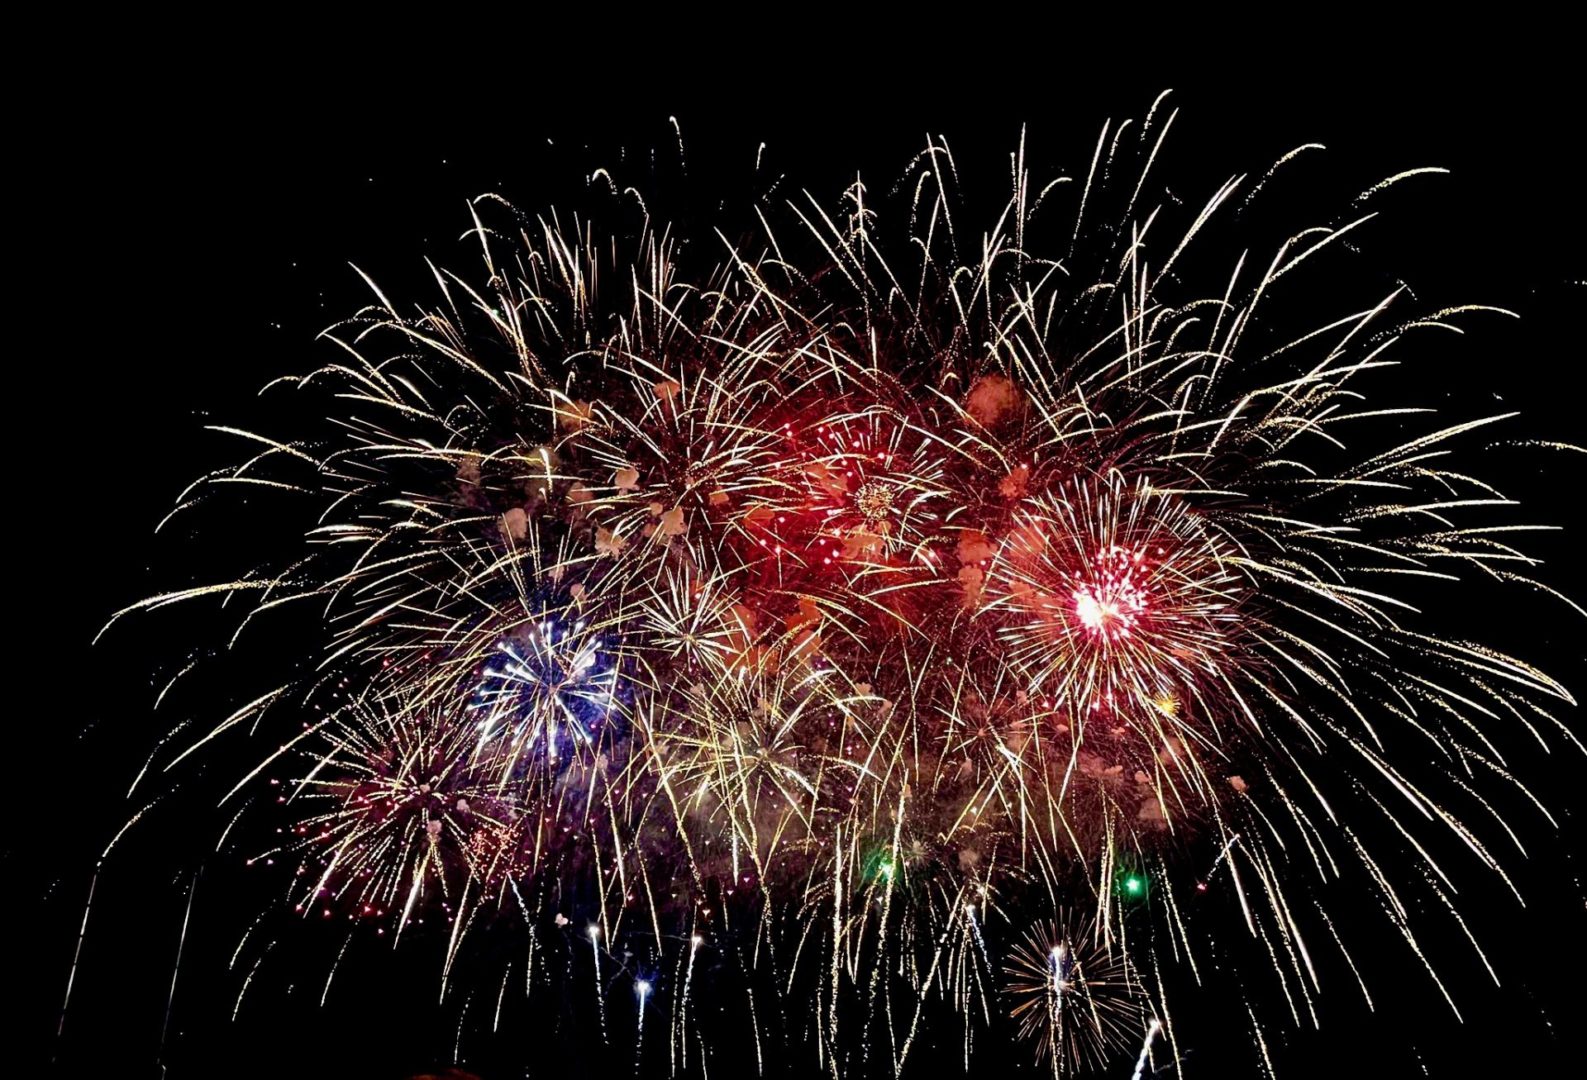 Fireworks light up the sky over Medlar Field at Lubrano Park on July 4, 2021. Central PA 4th Fest will return to Medlar Field with a ticketed event for 2022.